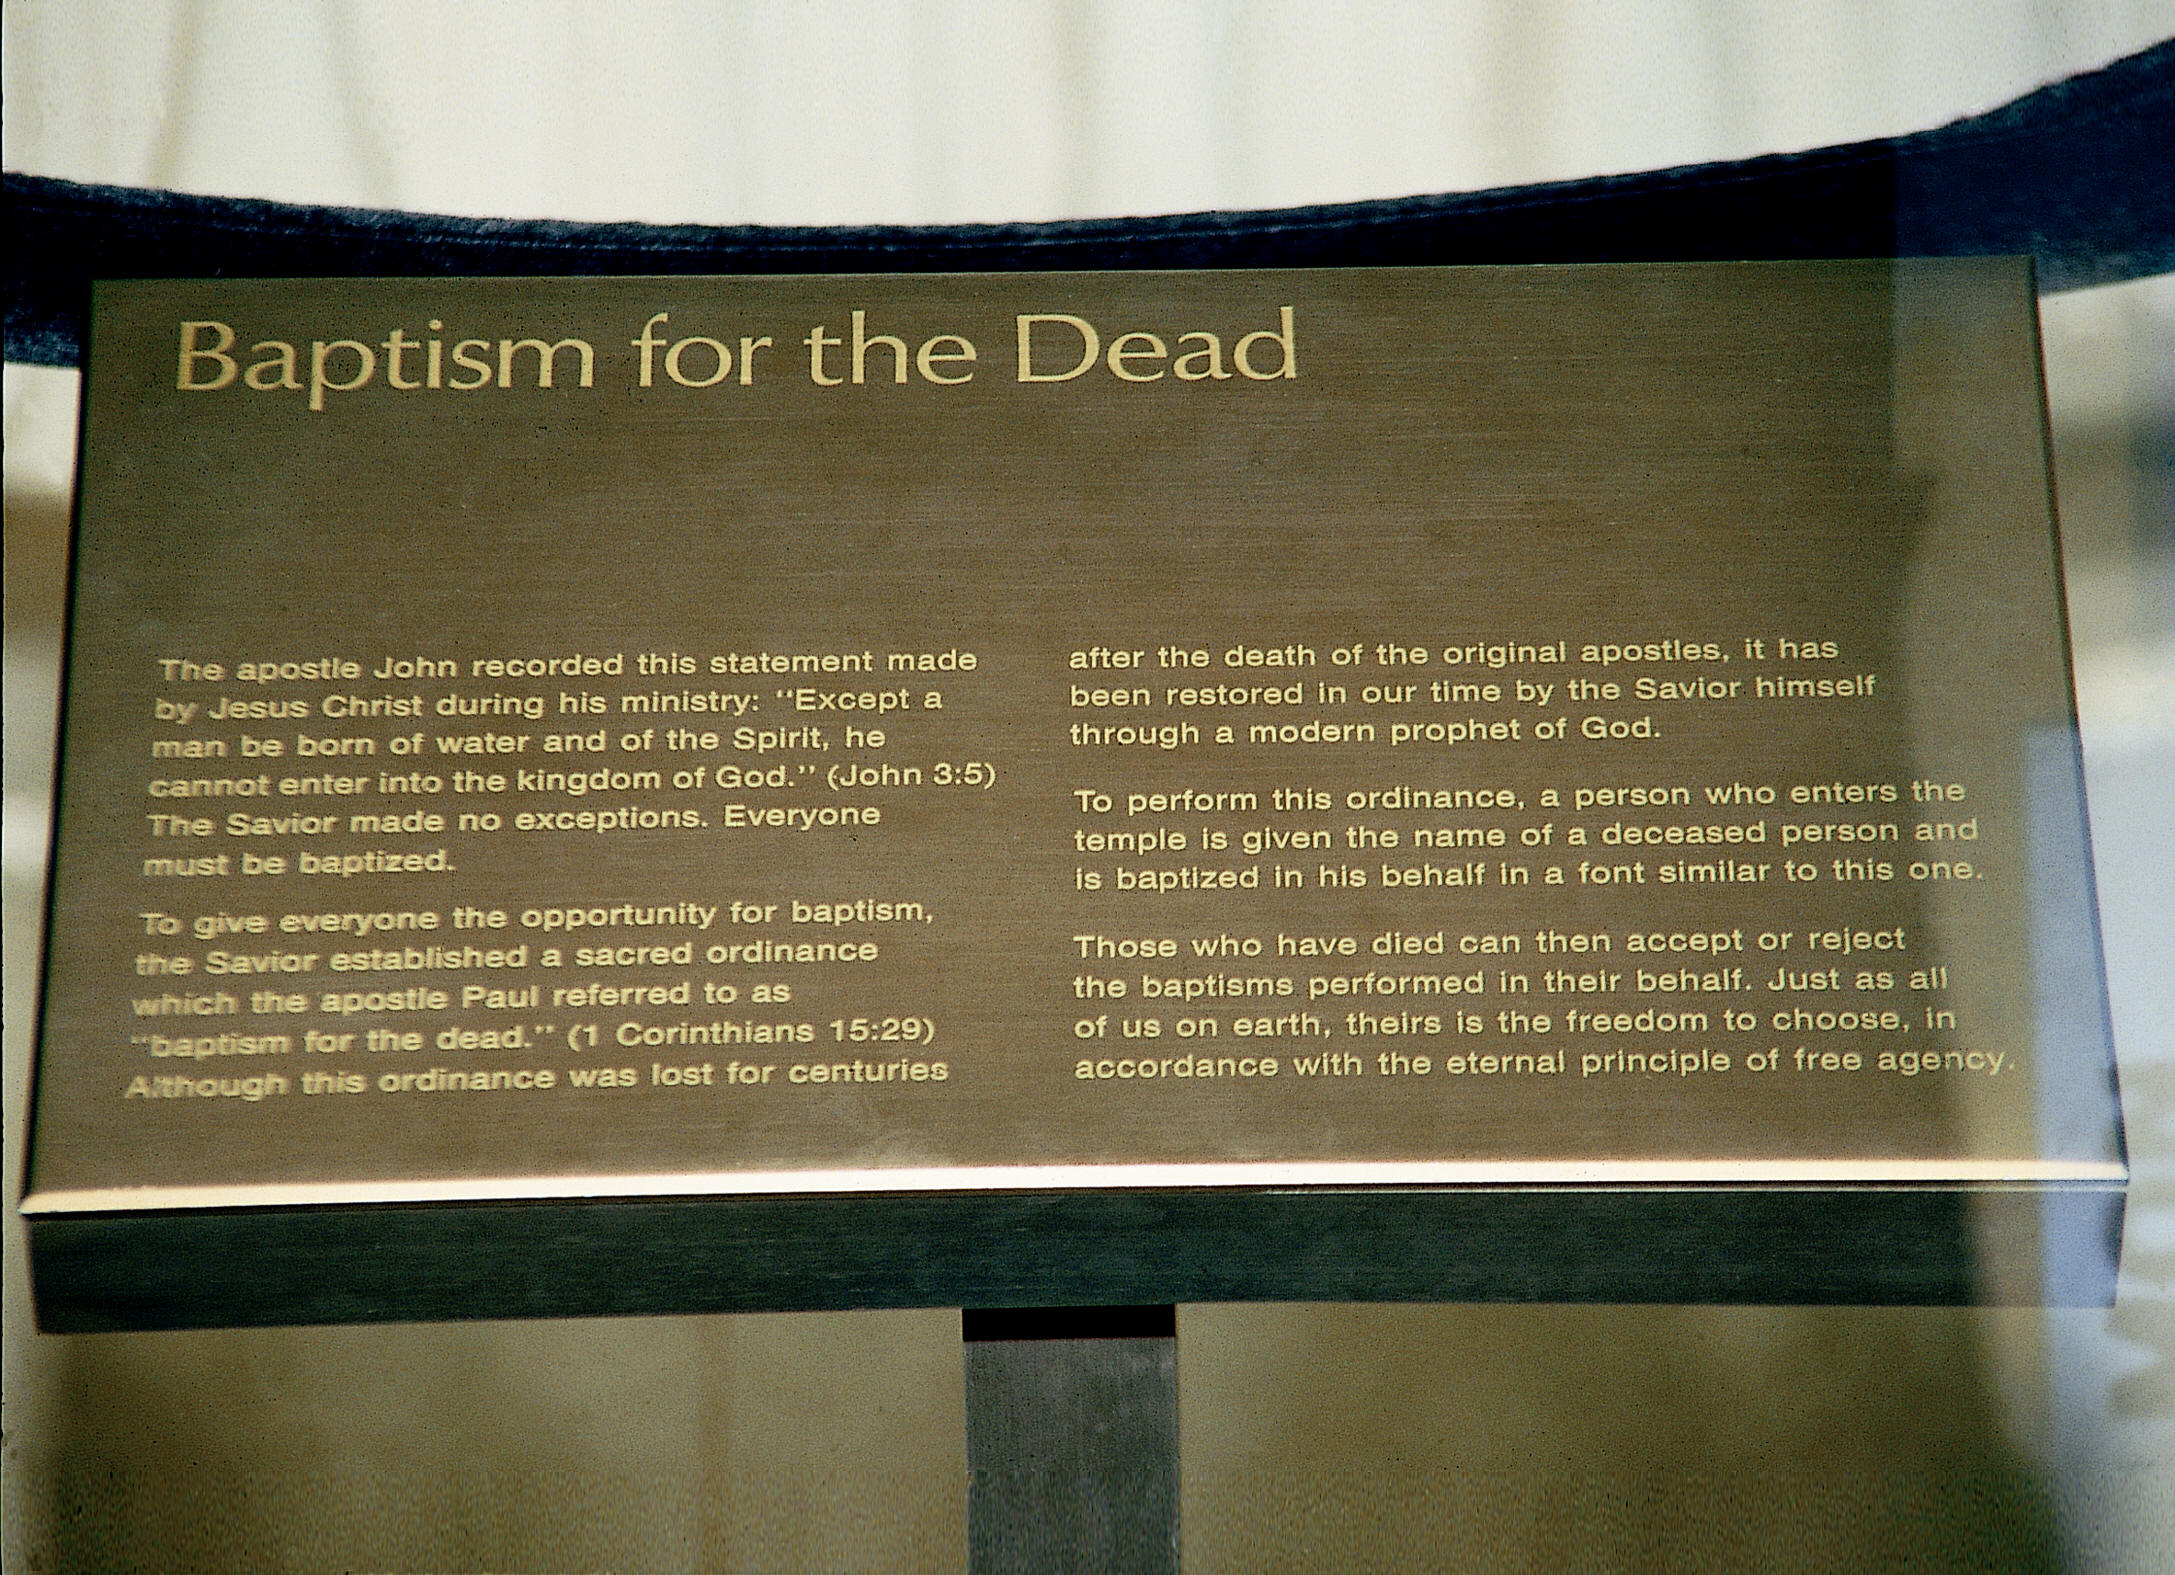 Placard explaining the temple baptismal font above. The second paragraph includes this caption: "... to give everyone an opportunity for baptism, the Savior established a sacred ordinance which the apostle Paul referred to as 'baptism for the dead' (1 Cor